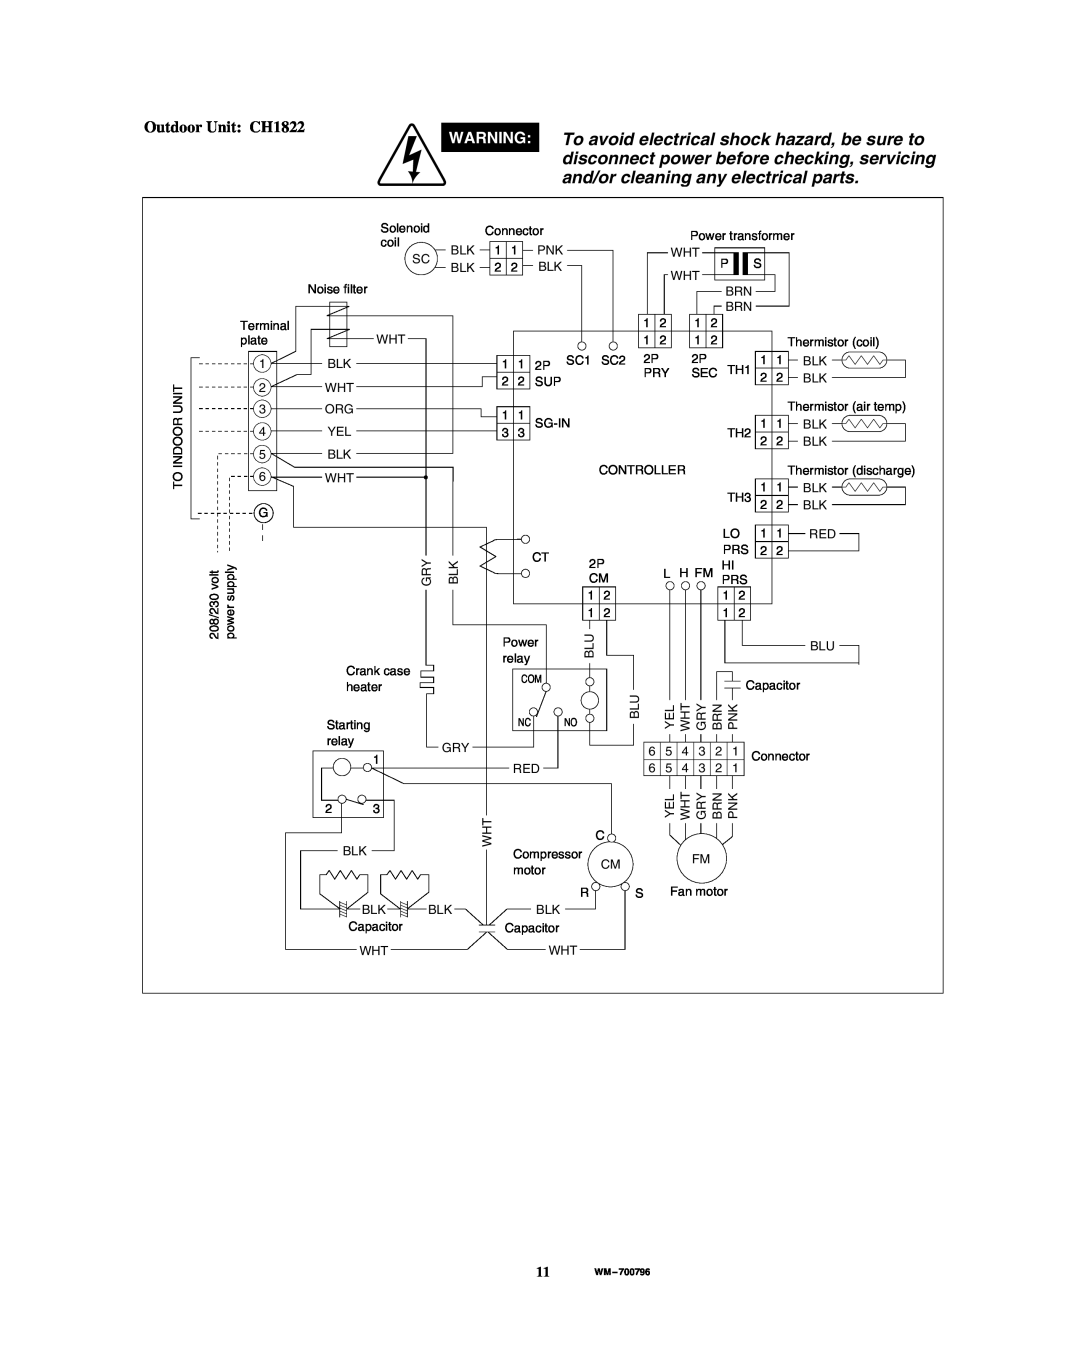 Sanyo KHS1822 service manual Outdoor Unit CH1822, Solenoid 